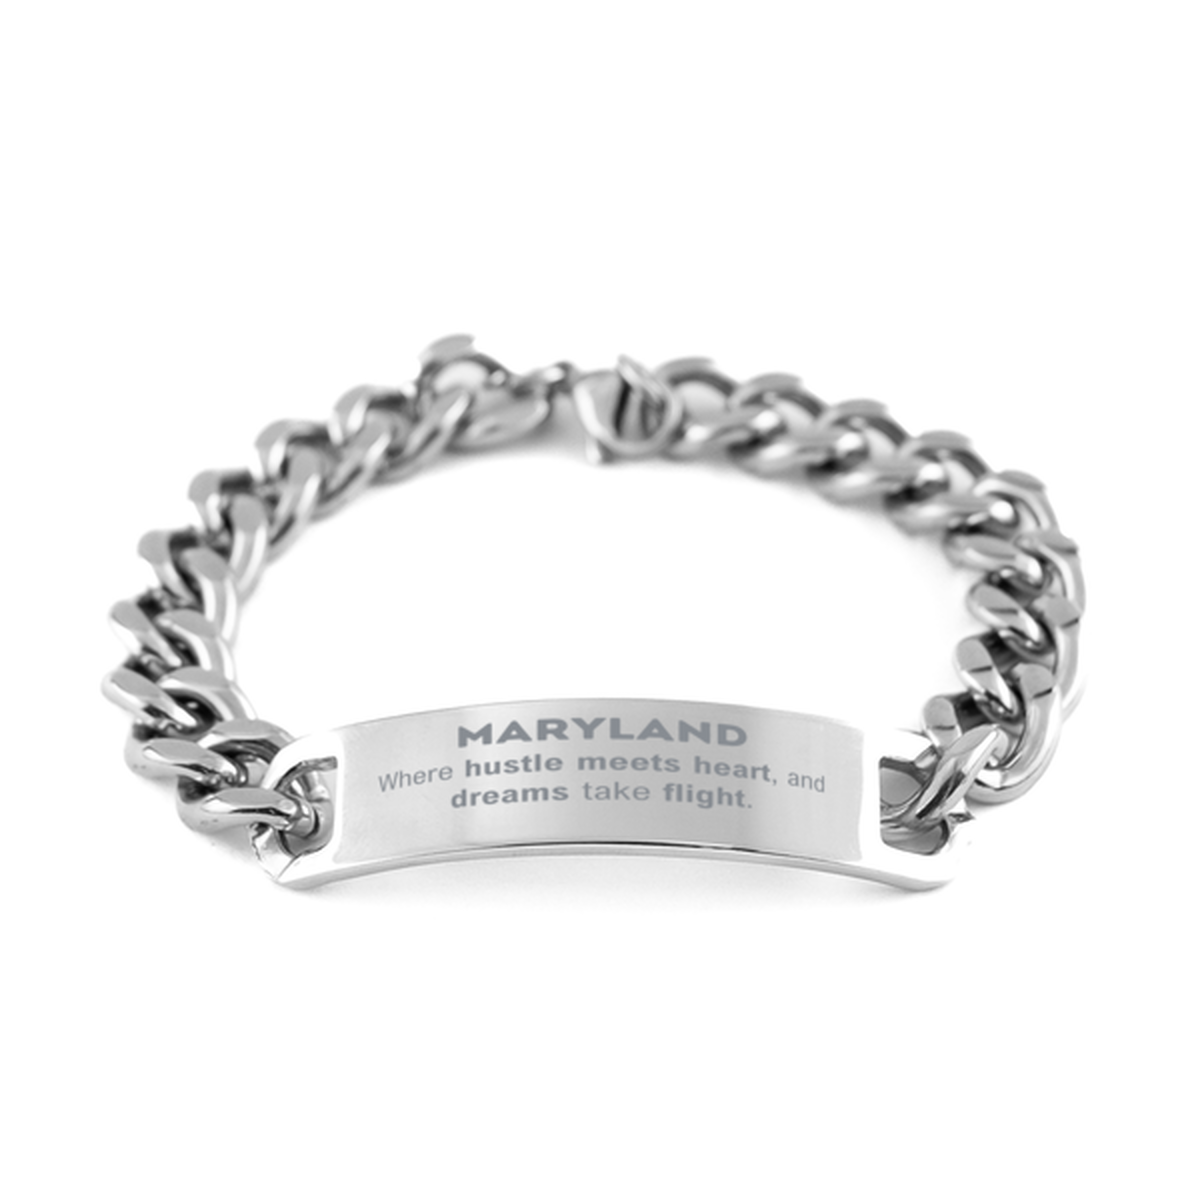 Maryland: Where hustle meets heart, and dreams take flight, Maryland Gifts, Proud Maryland Christmas Birthday Maryland Cuban Chain Stainless Steel Bracelet, Maryland State People, Men, Women, Friends